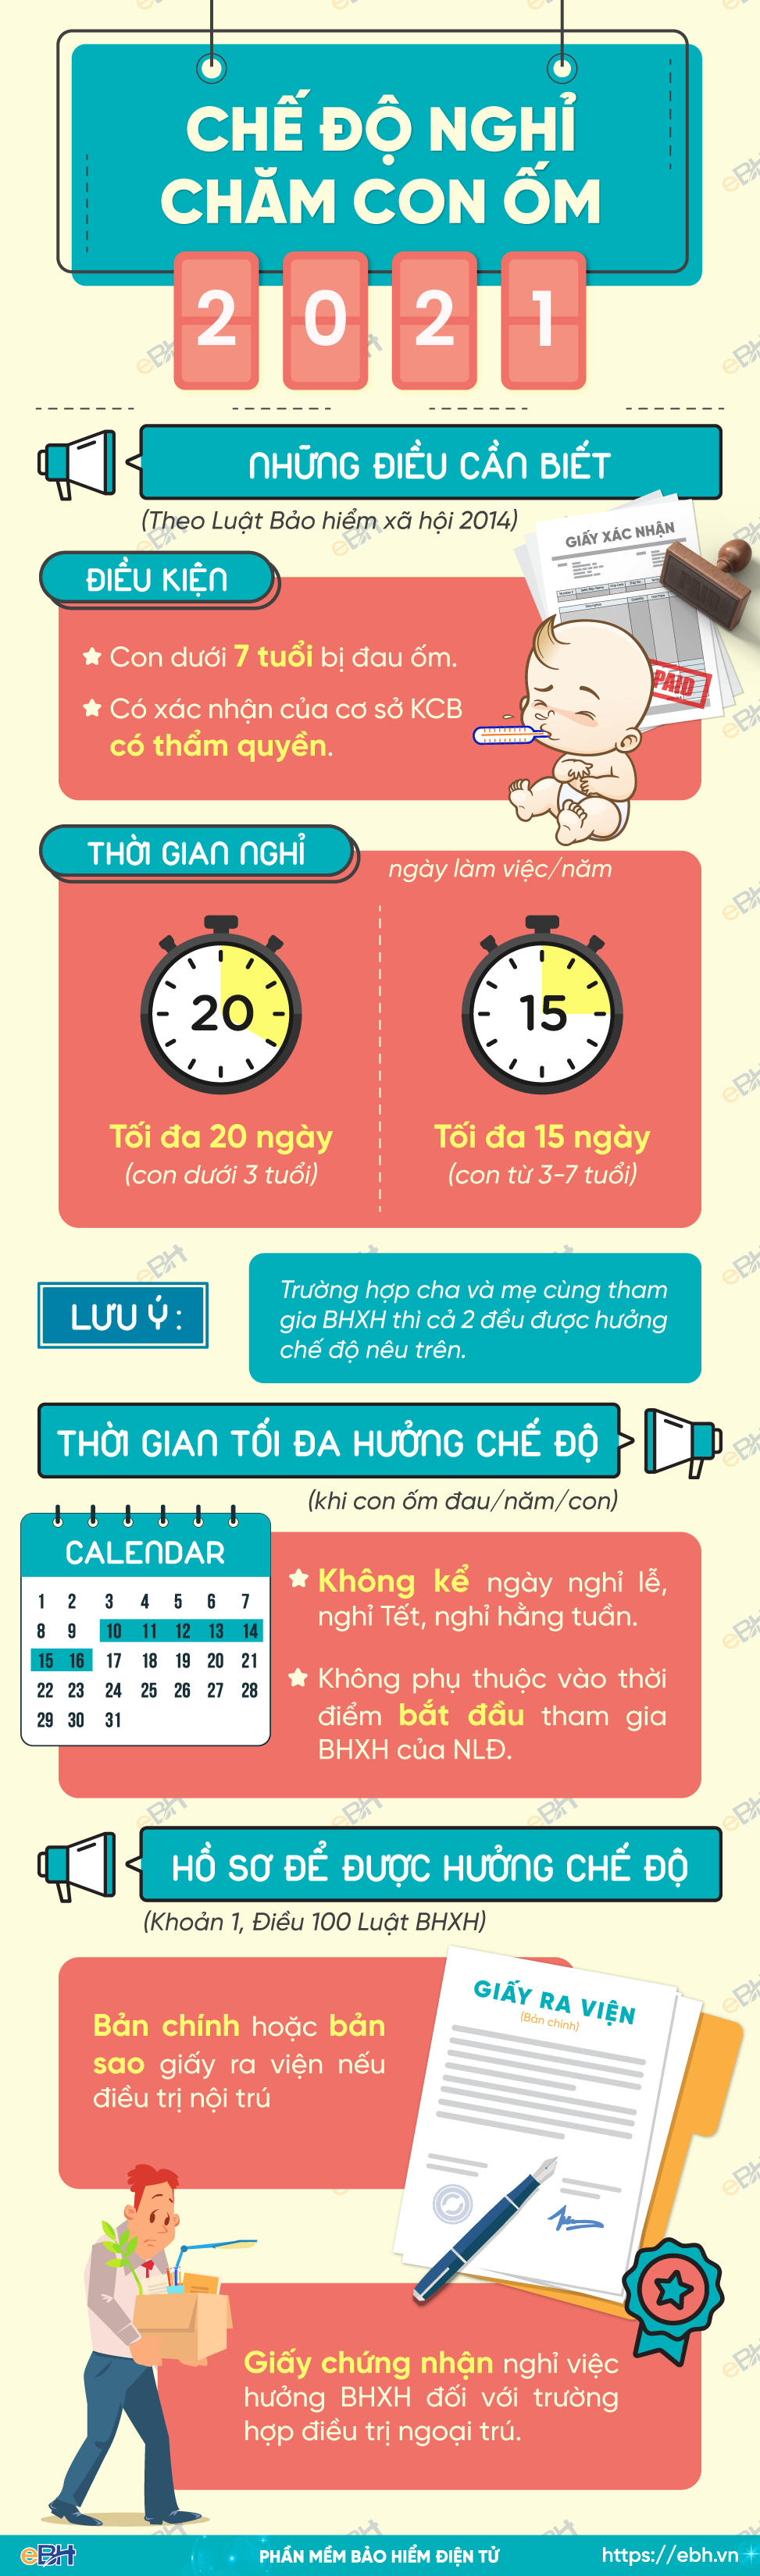 https://ebh.vn/tin-tuc/infographic-che-do-nghi-cham-con-om-2021